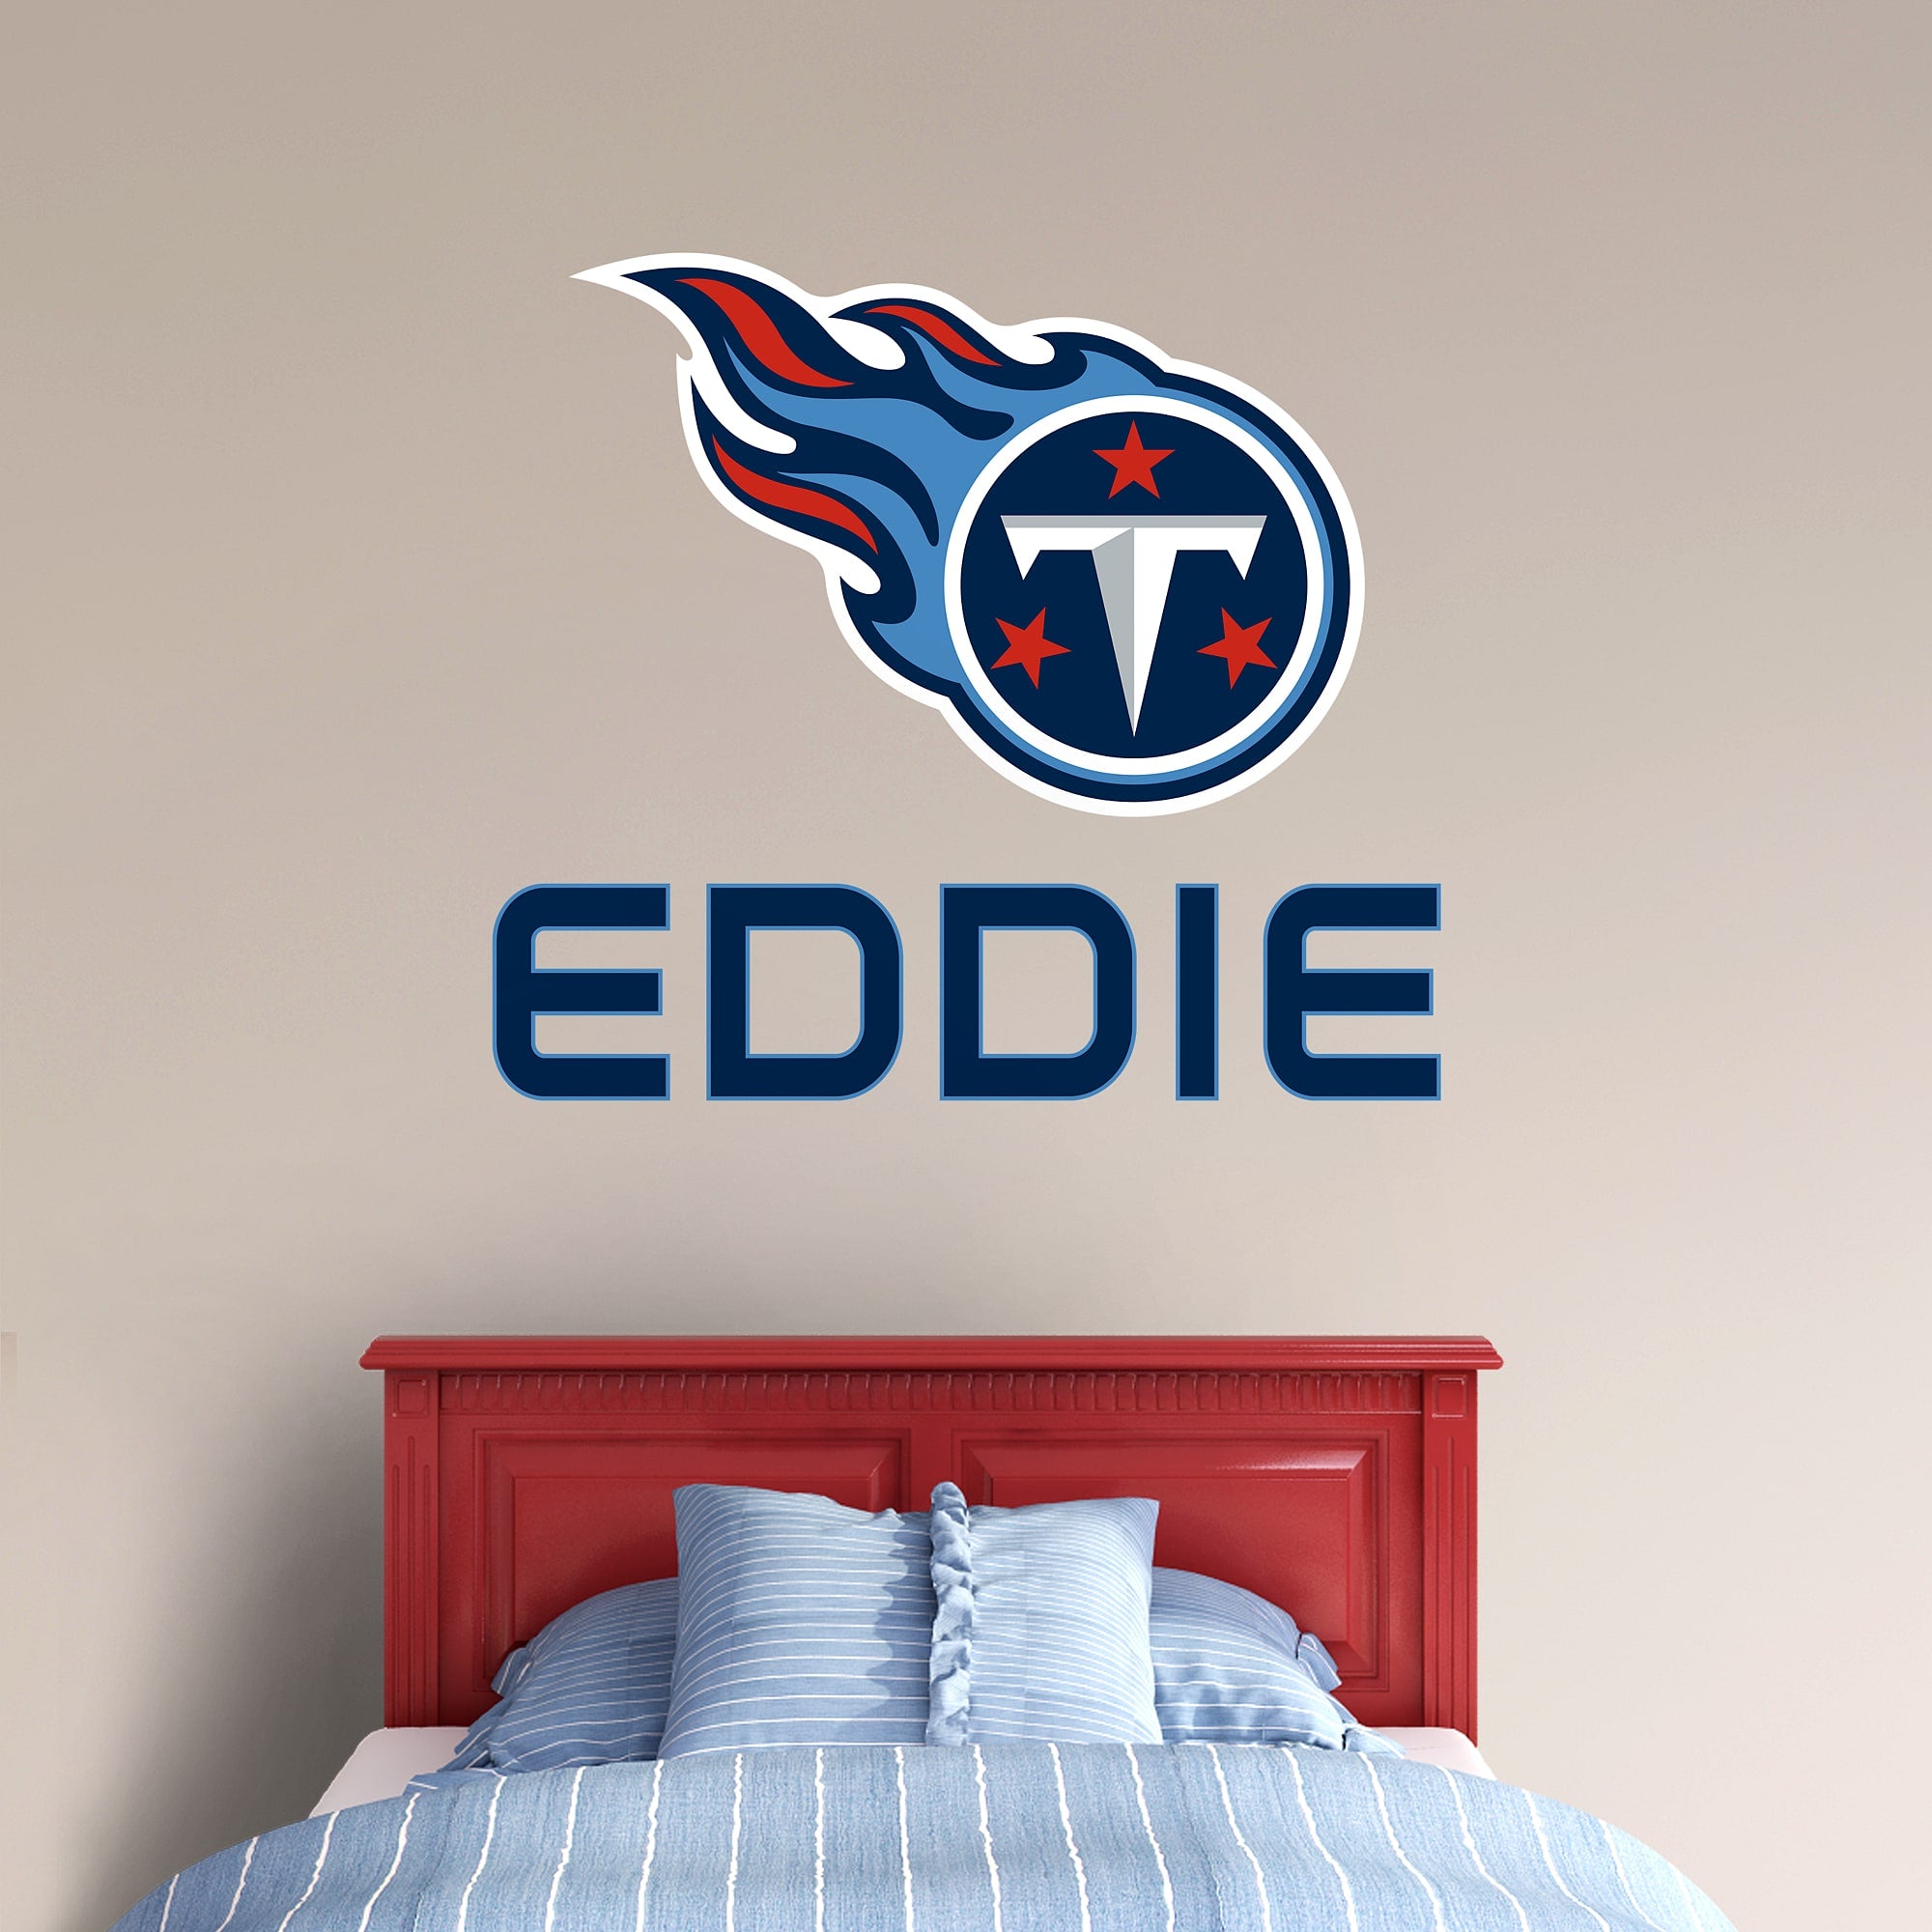 Tennessee Titans: Stacked Personalized Name - Officially Licensed NFL Transfer Decal in Navy (52"W x 39.5"H) by Fathead | Vinyl